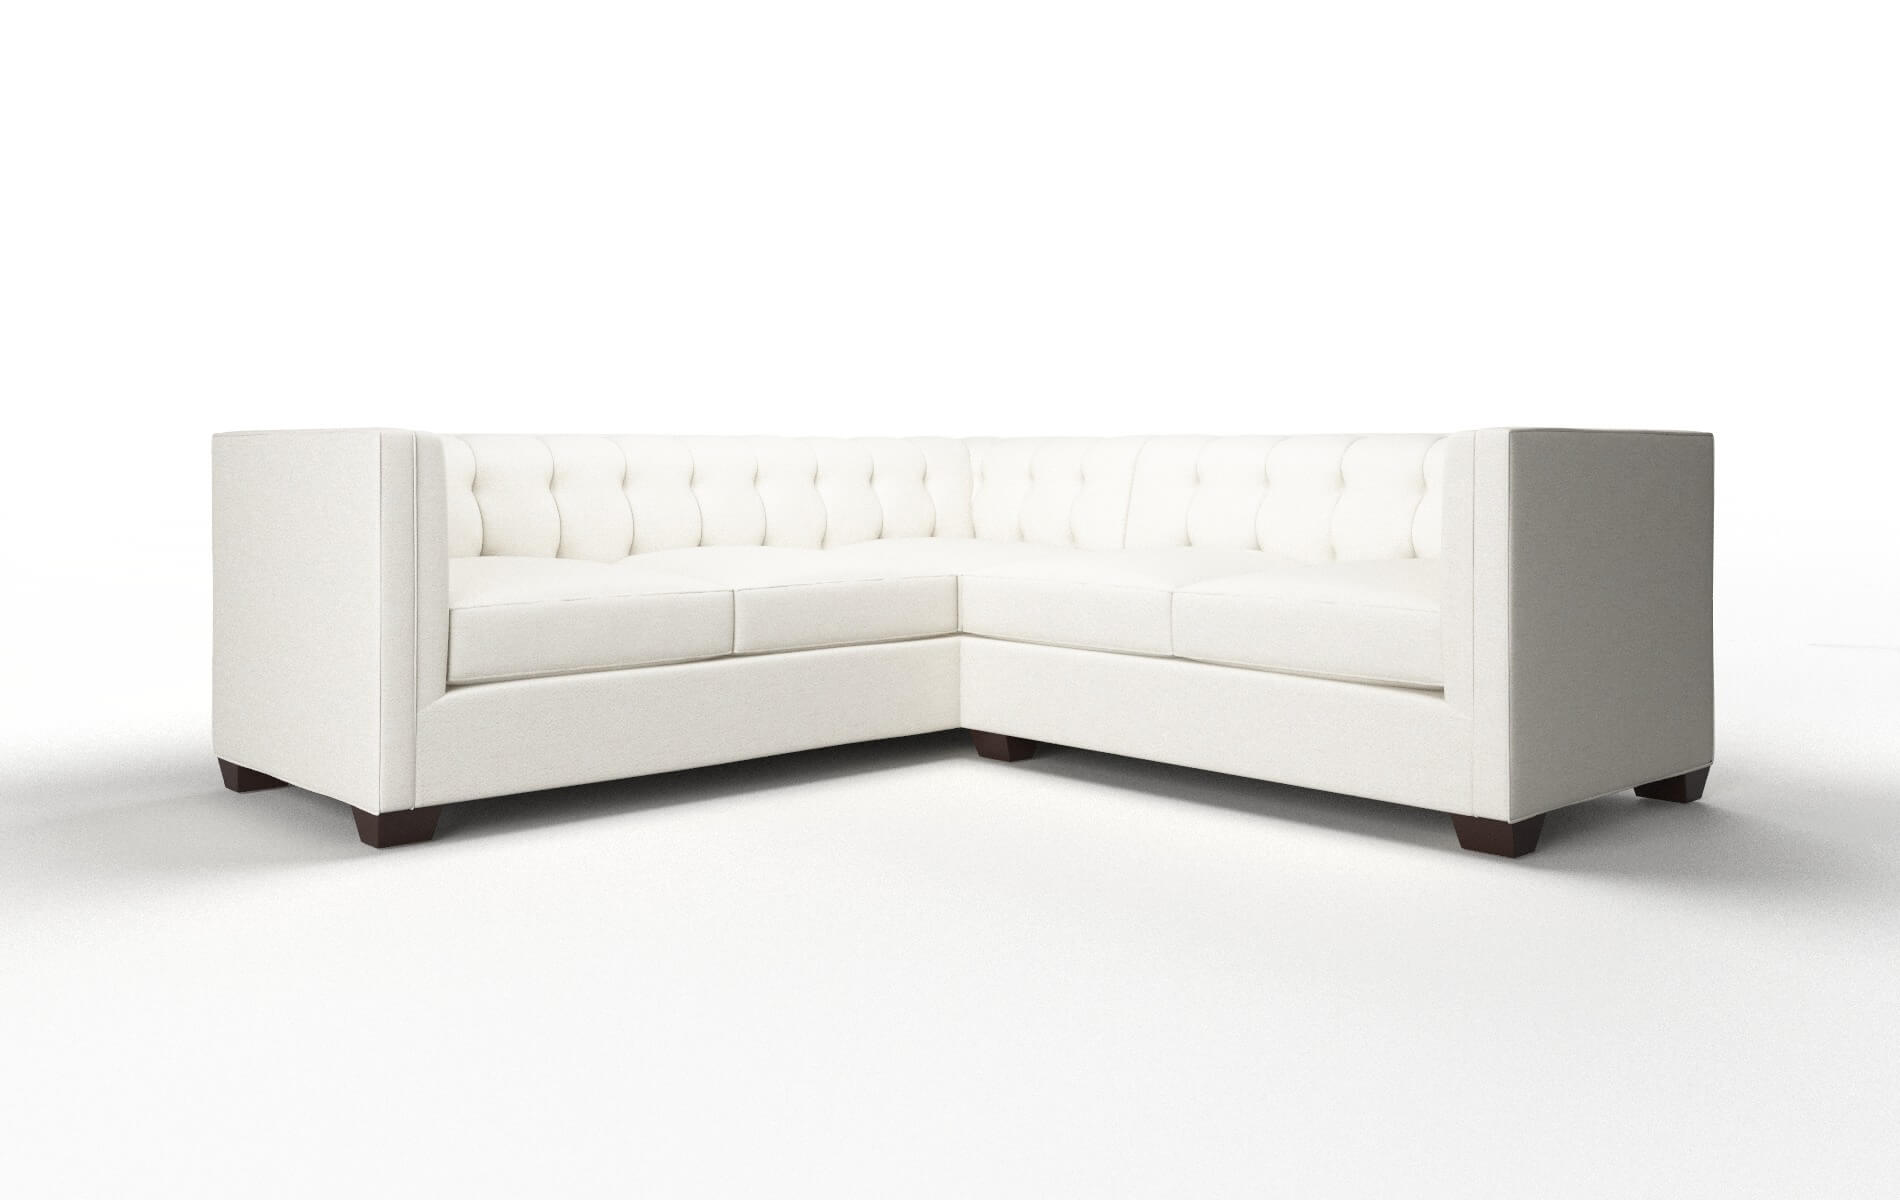 Grant Catalina Ivory Sectional espresso legs 1